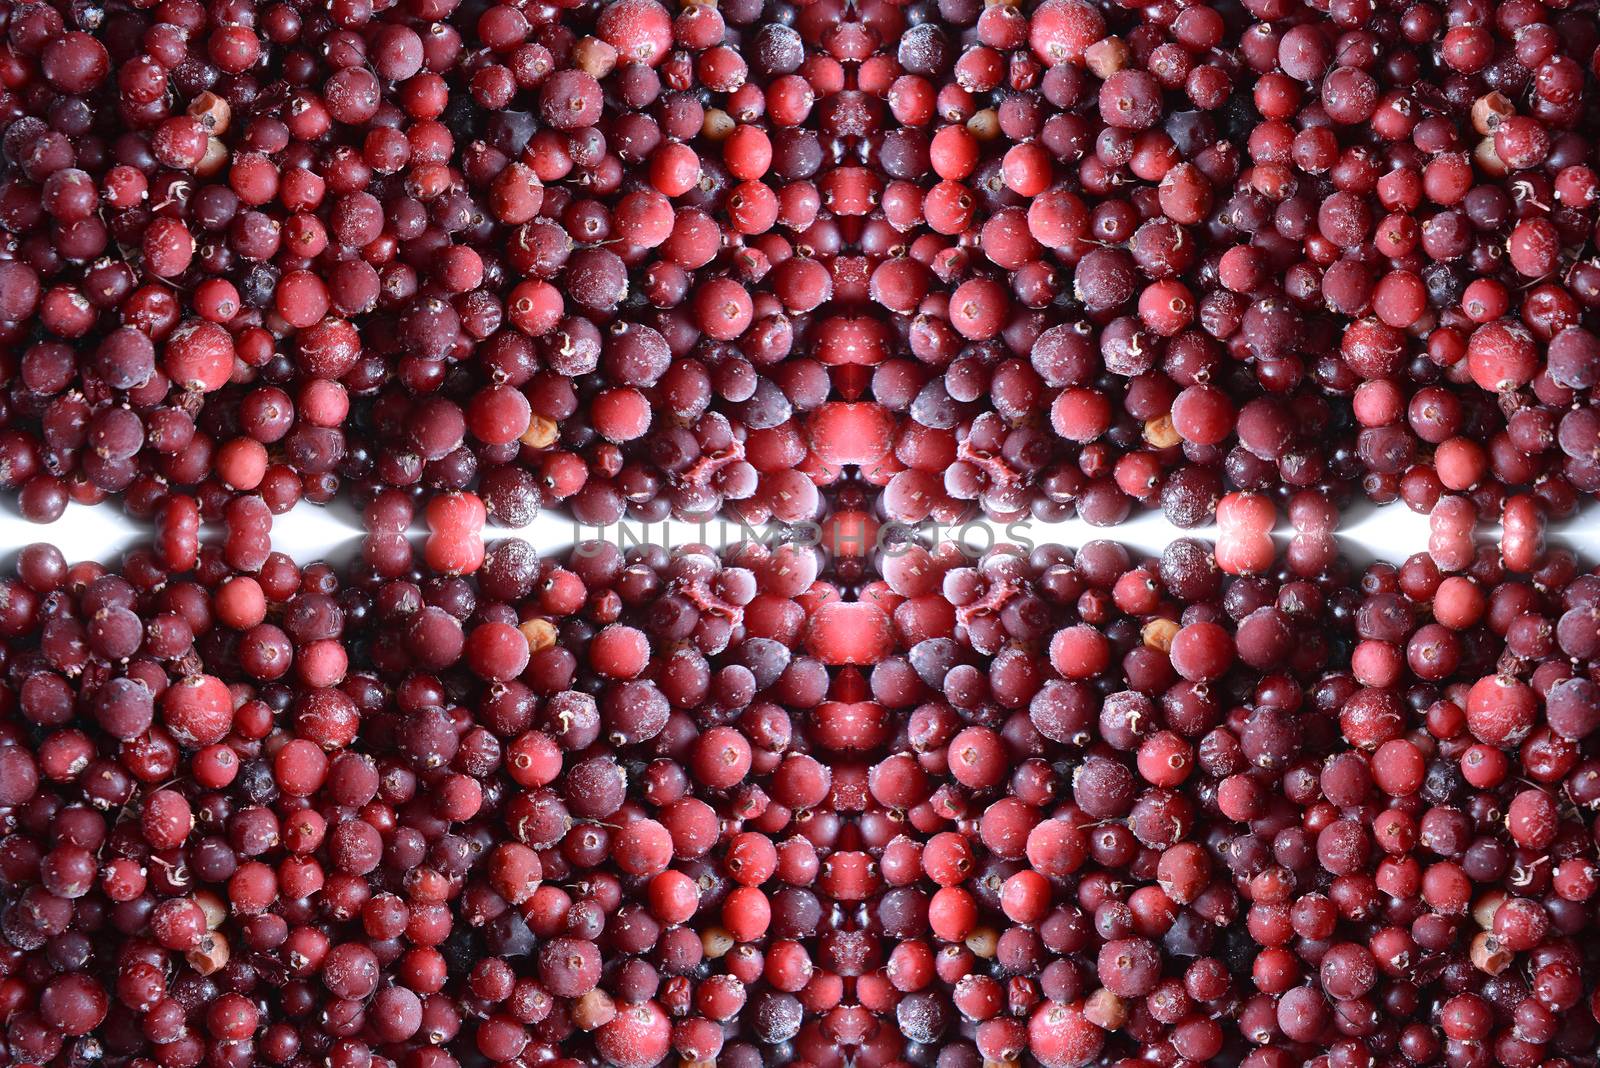 Food background, texture of assorted fresh berries. With sound waves on center